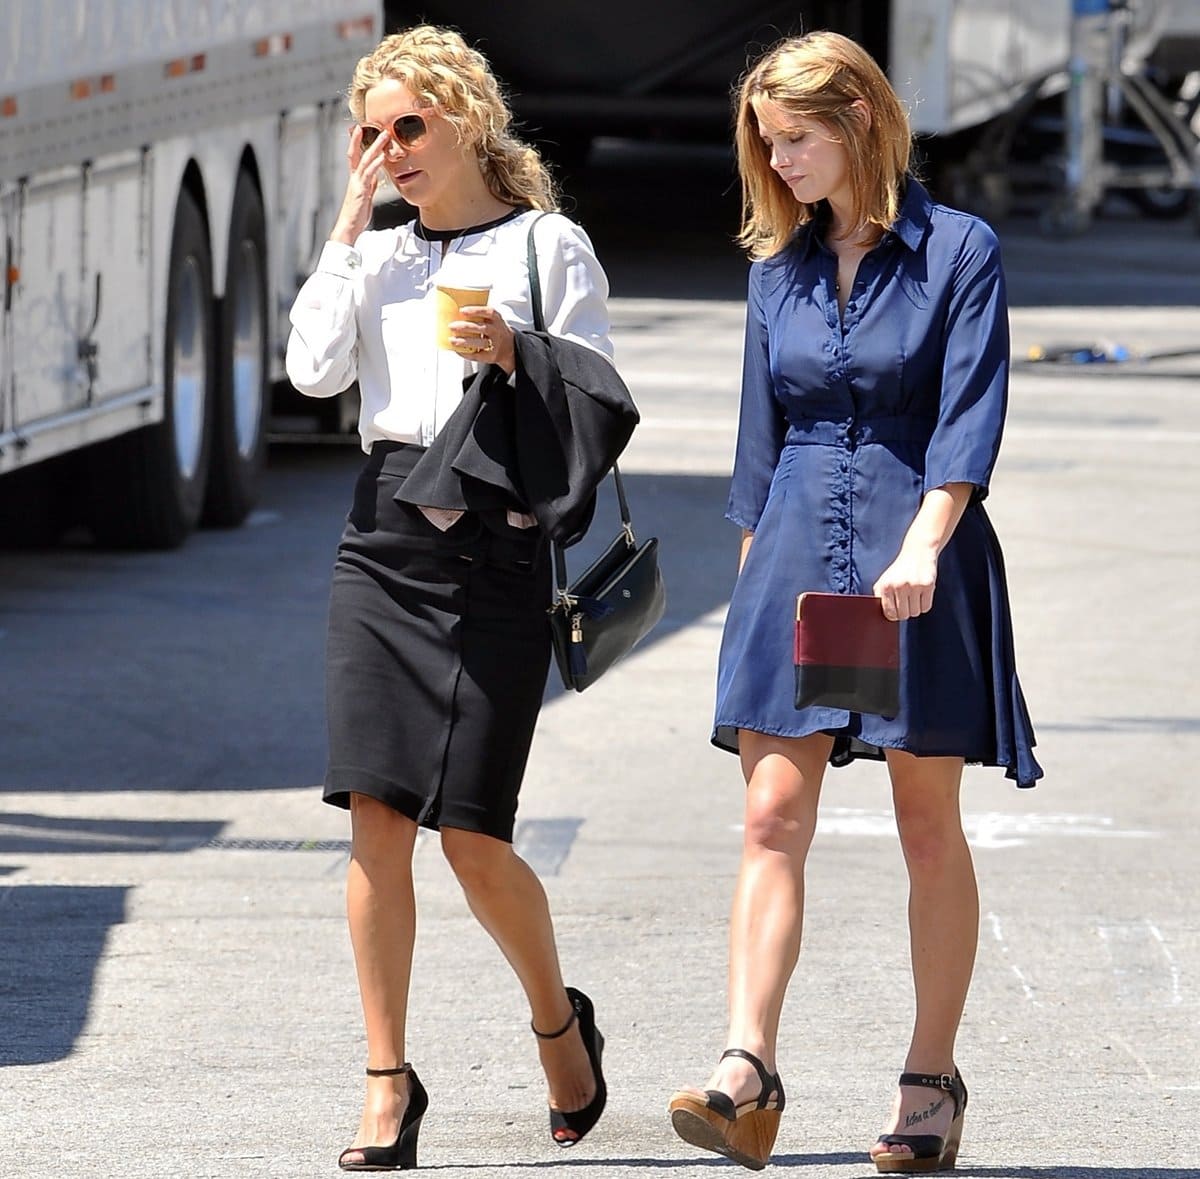 Ashley Greene and Kate Hudson on the set of the 2014 American comedy-drama film Wish I Was Here